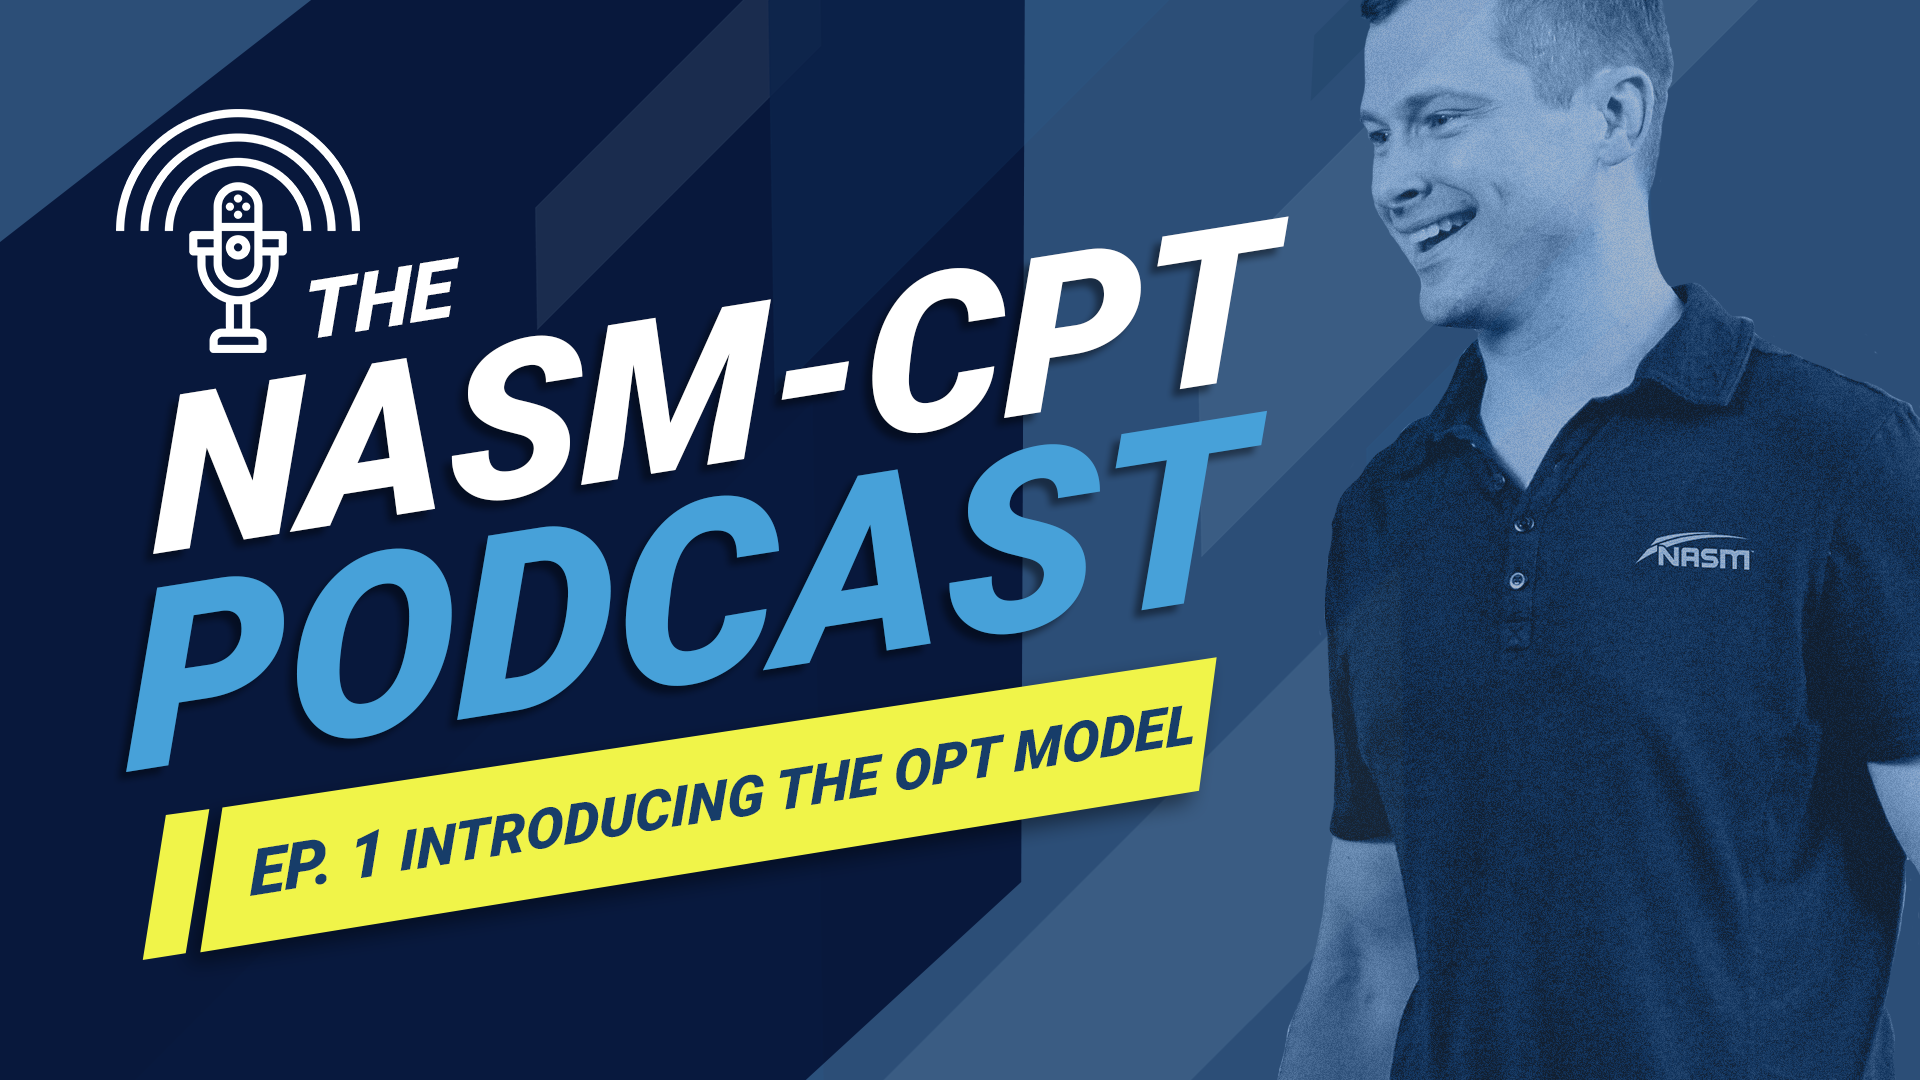 The Nasm Cpt Podcast Introducing Opt Model